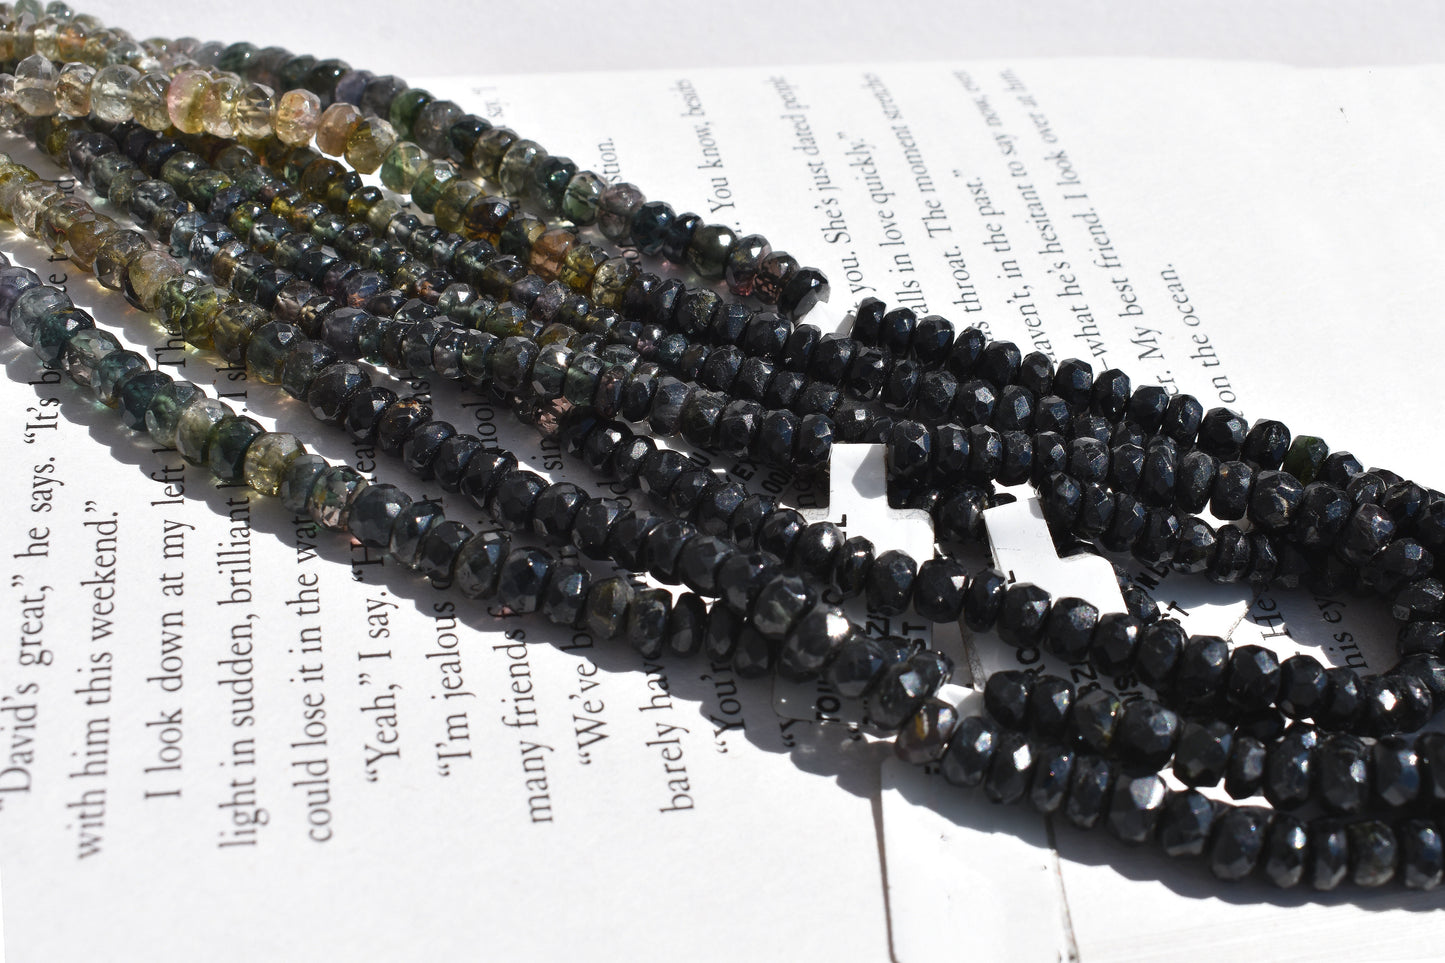 Grey & Black Tourmaline Rondelle Faceted Beads 3.5-5.5mm